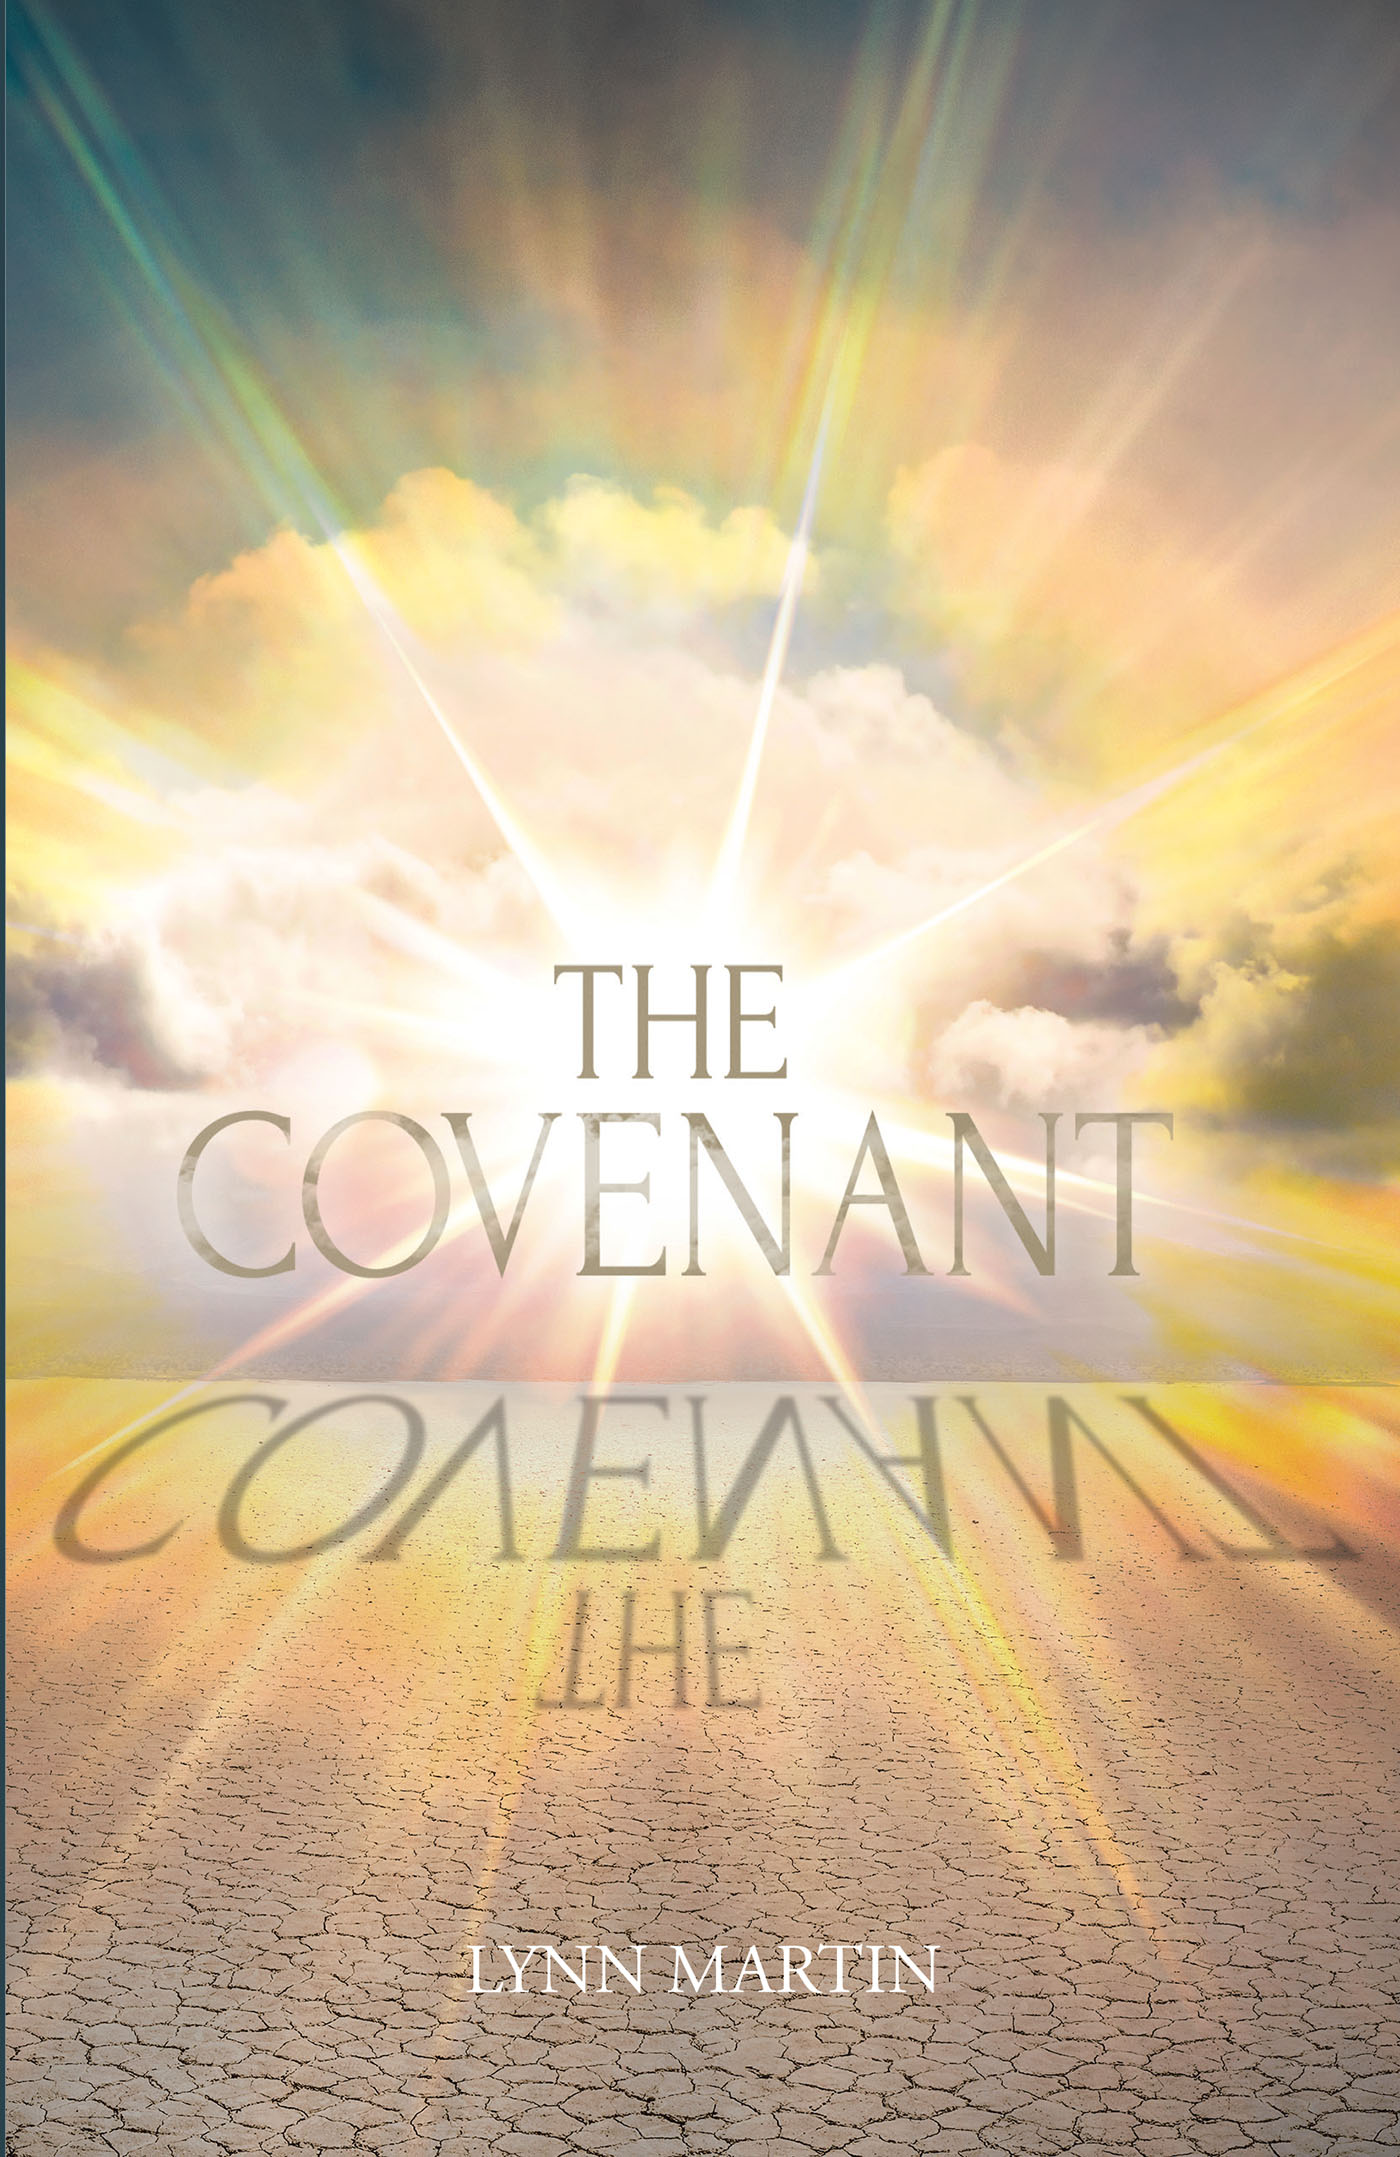 Lynn Martin’s Newly Released "The Covenant" is an Informative Discussion of the Importance of a Biblically-Based Agreement